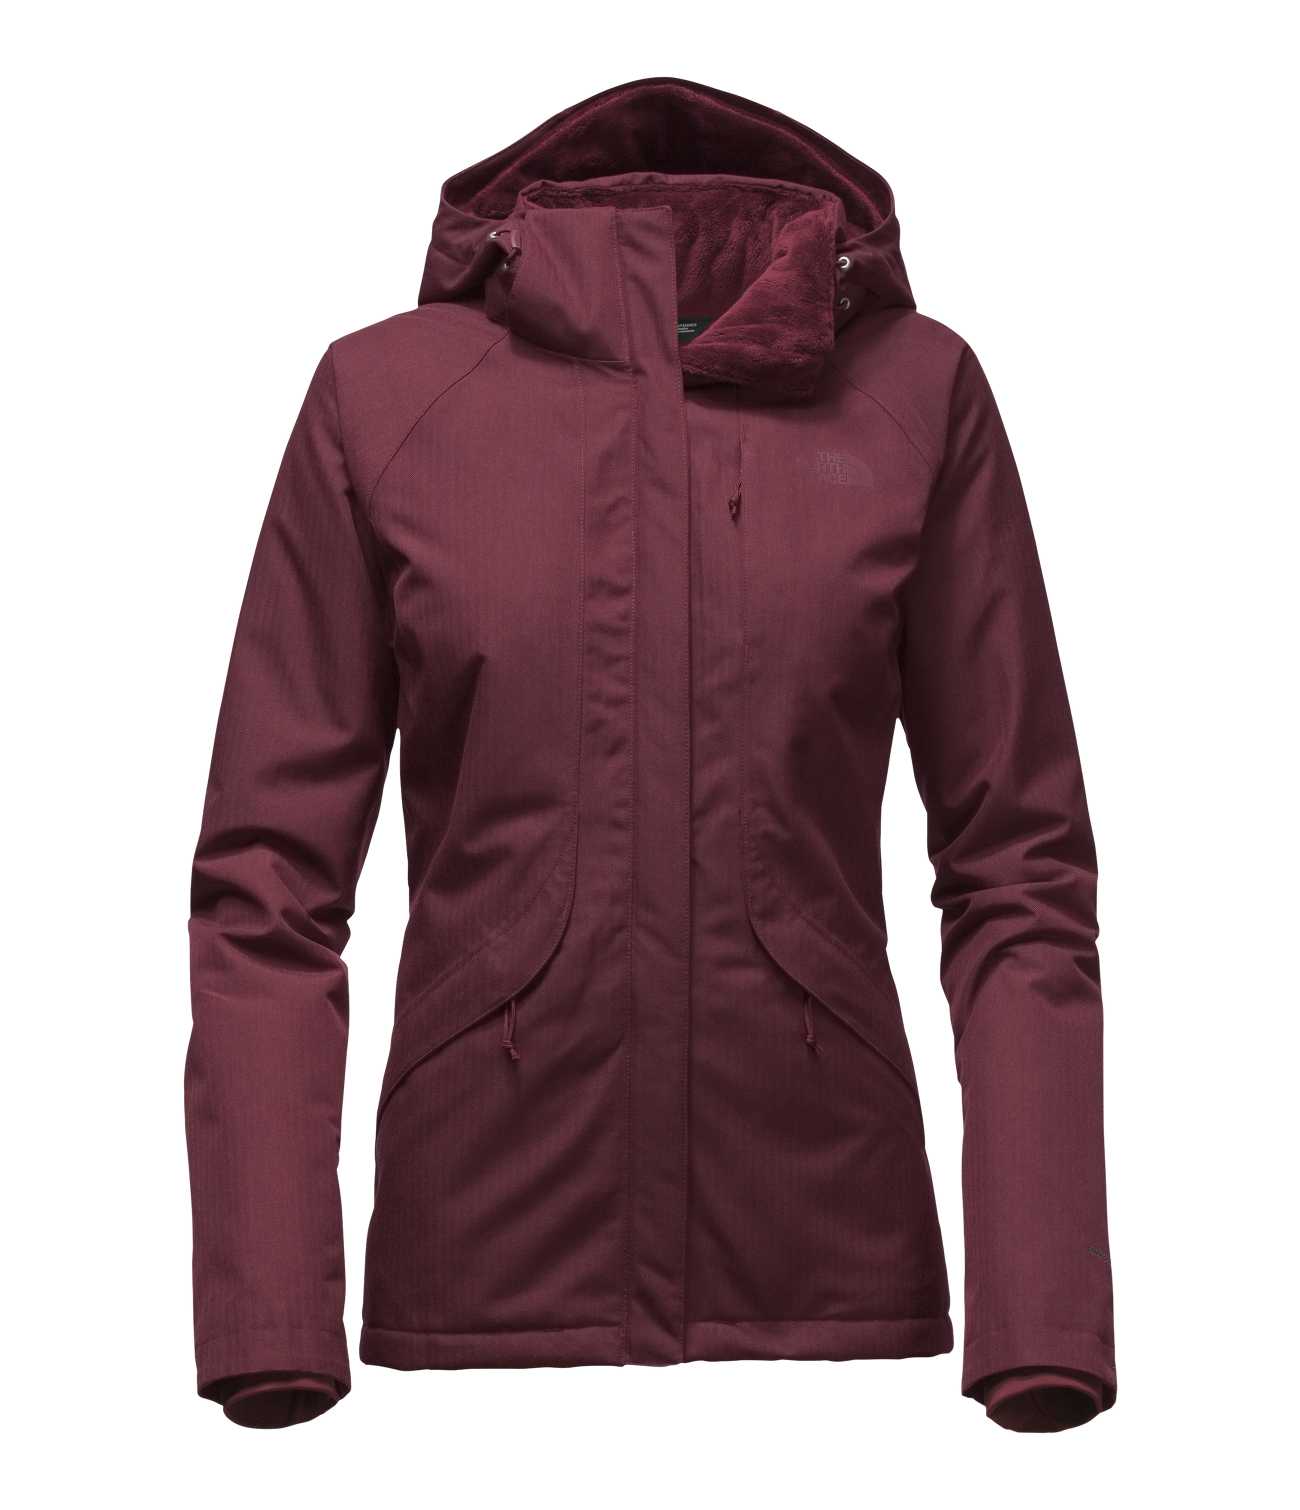 The North Face Renewed - WOMEN'S INLUX INSULATED JACKET